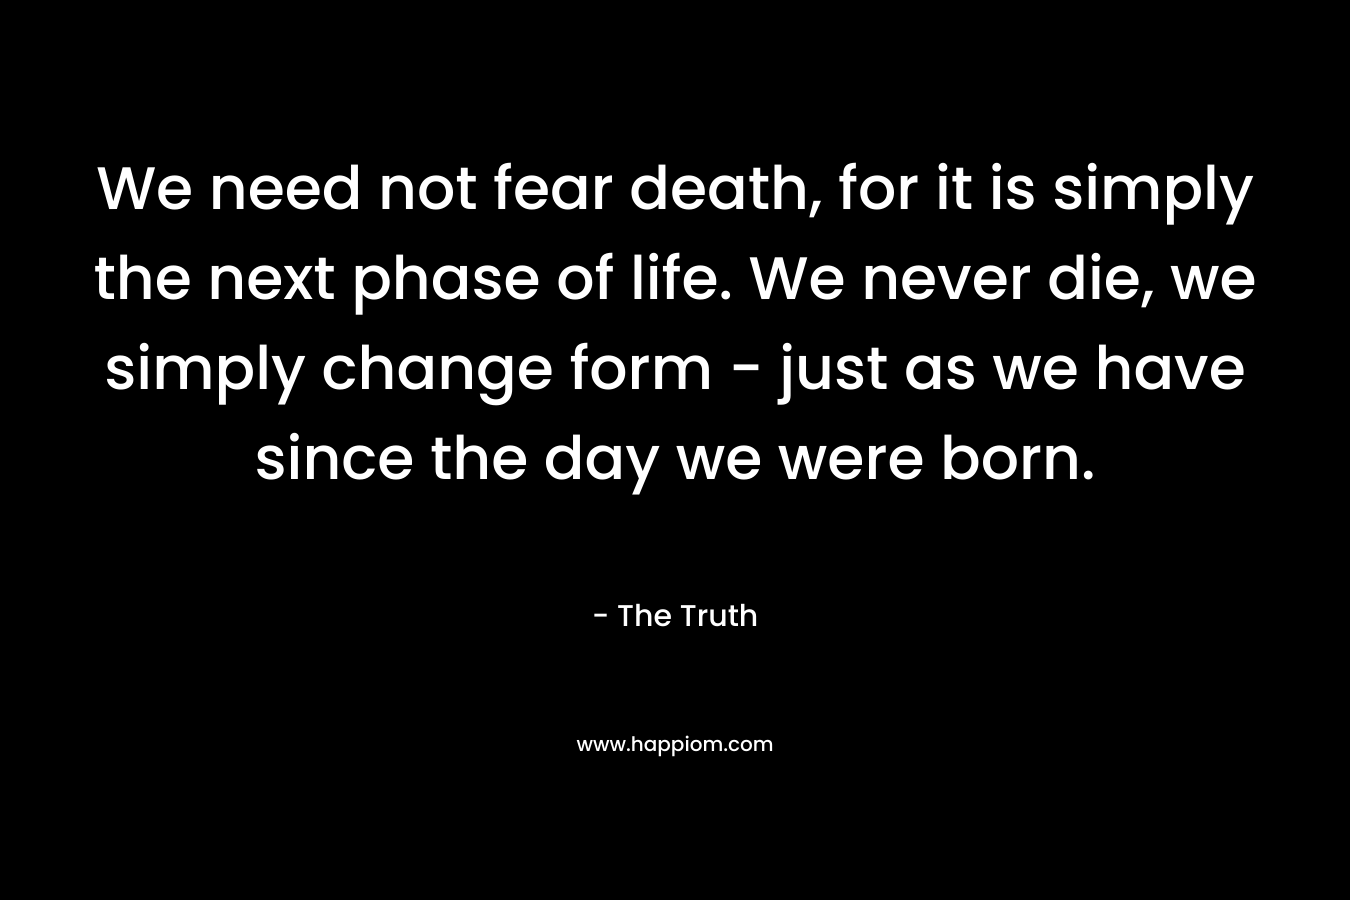 We need not fear death, for it is simply the next phase of life. We never die, we simply change form – just as we have since the day we were born. – The Truth